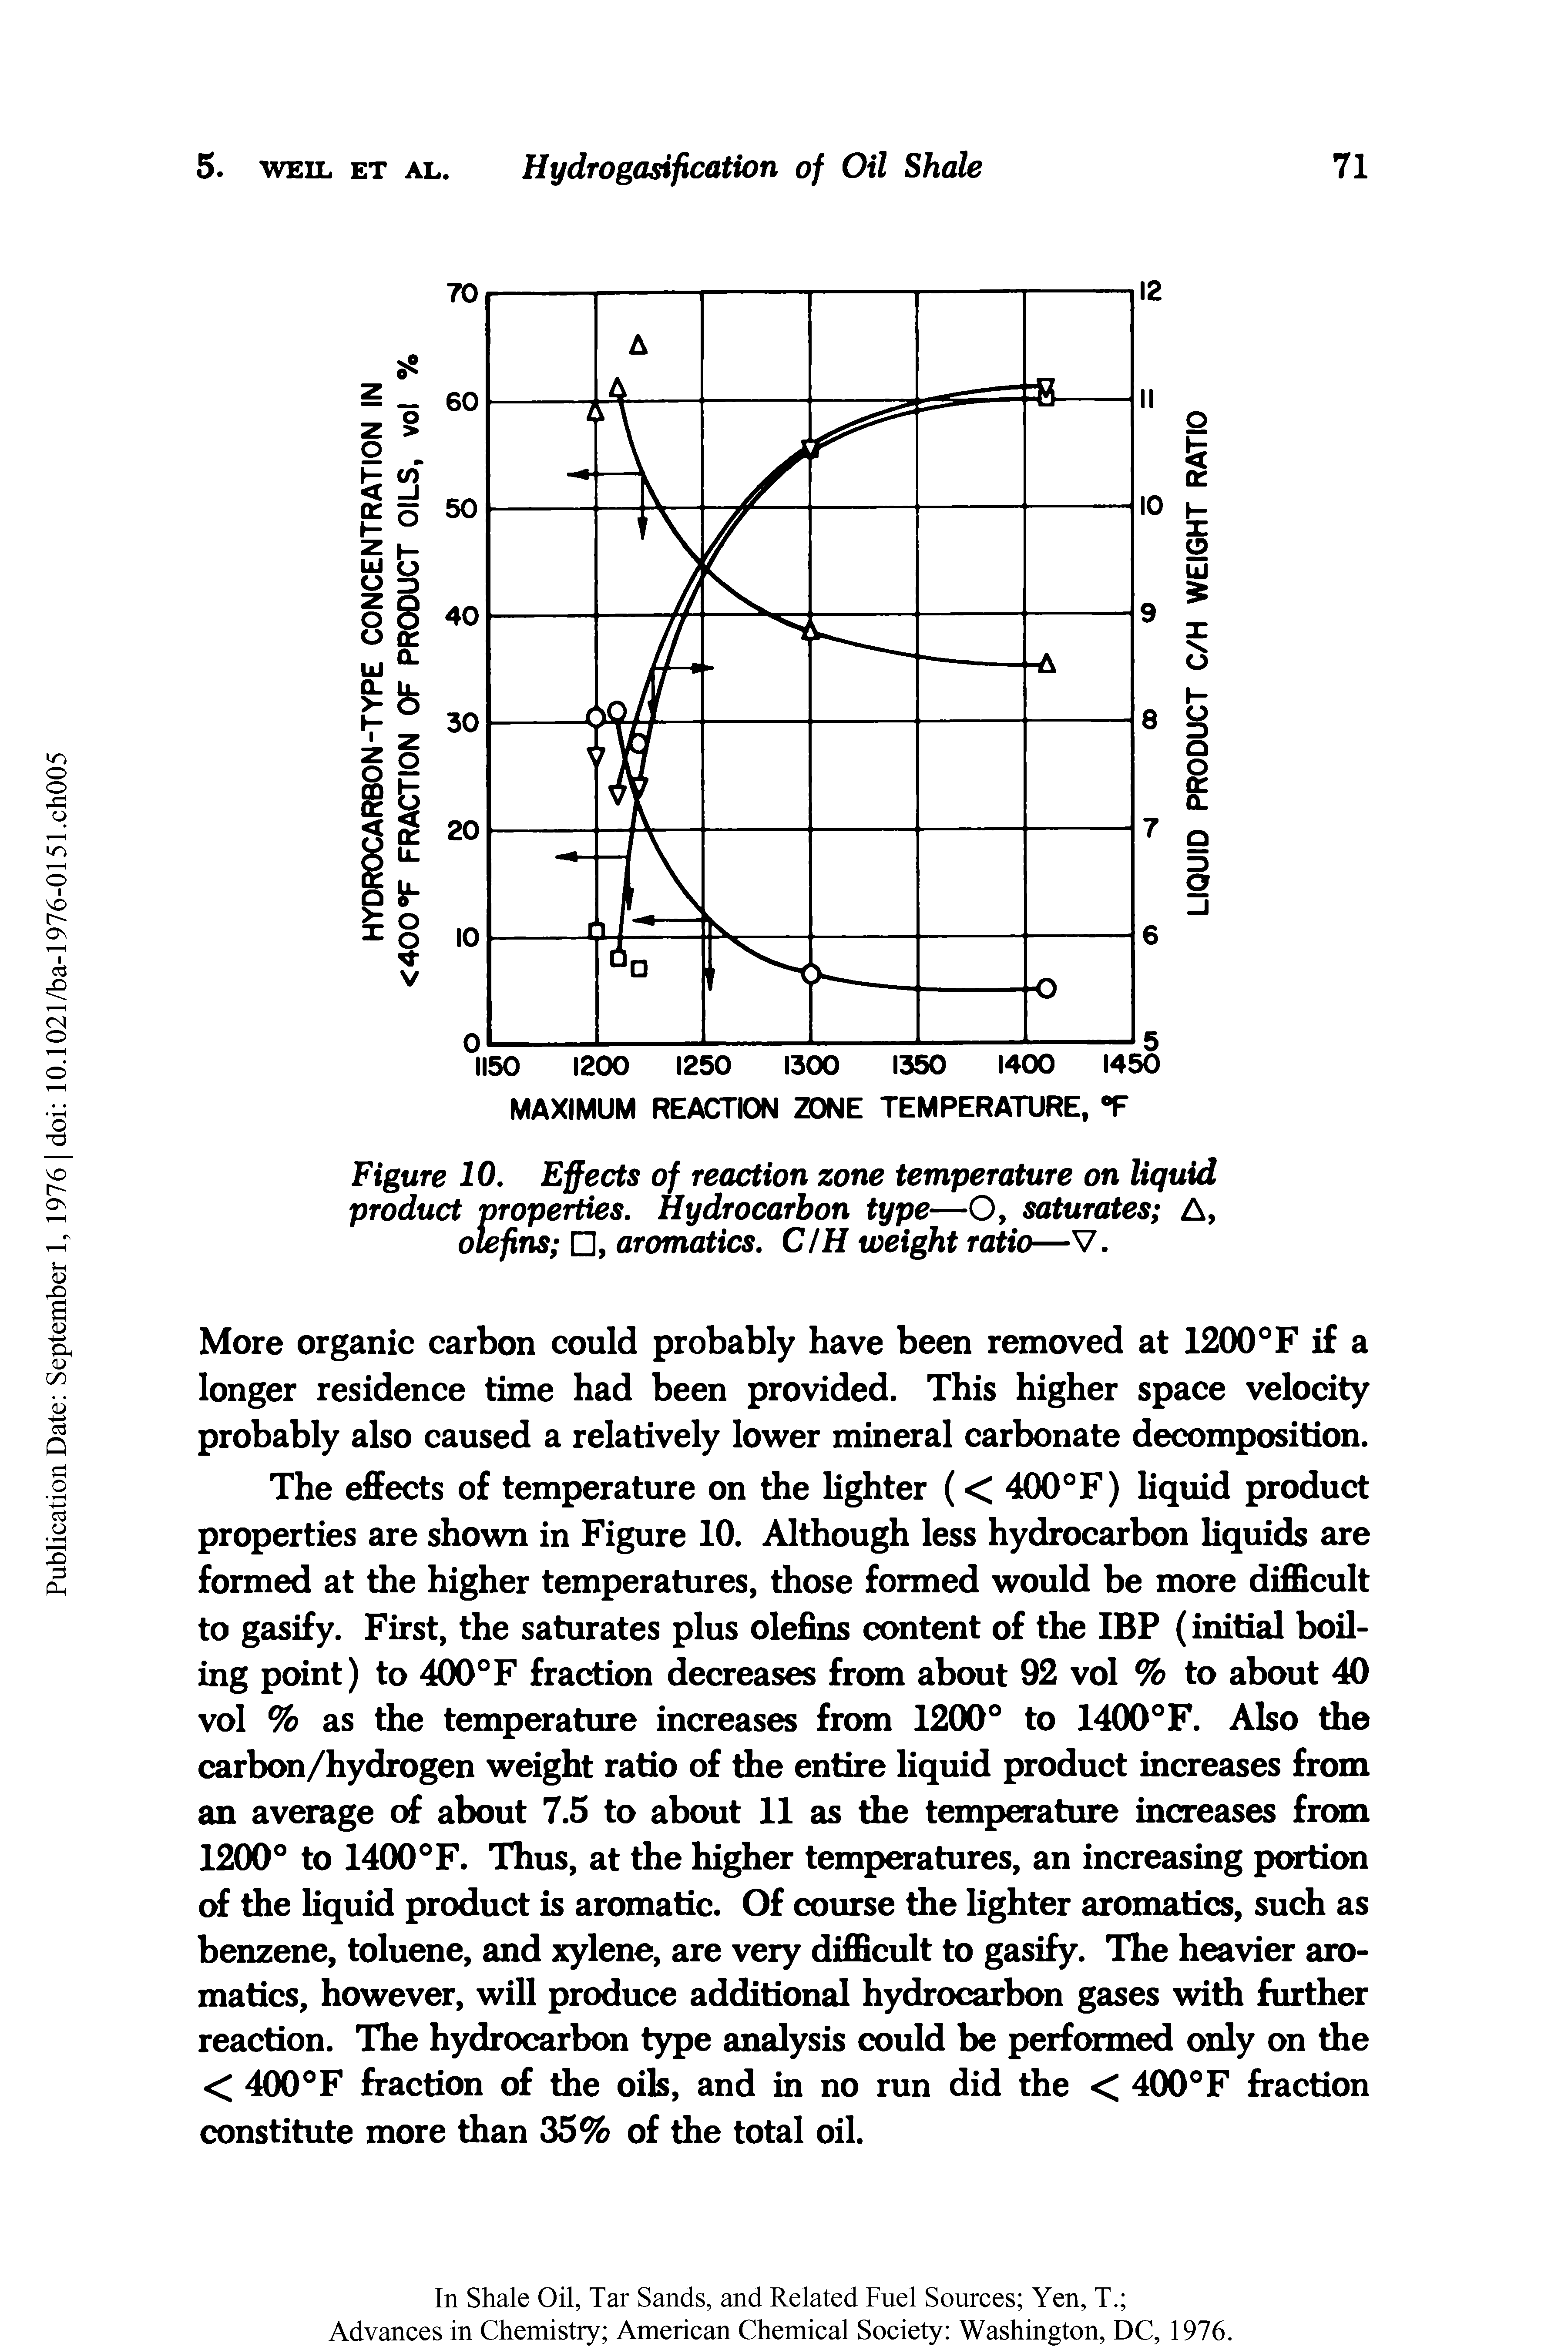 Figure 10. Effects of reaction zone temperature on liquid product properties. Hydrocarbon type—O, saturates A, olefins , aromatics. C/H weight ratio—V.